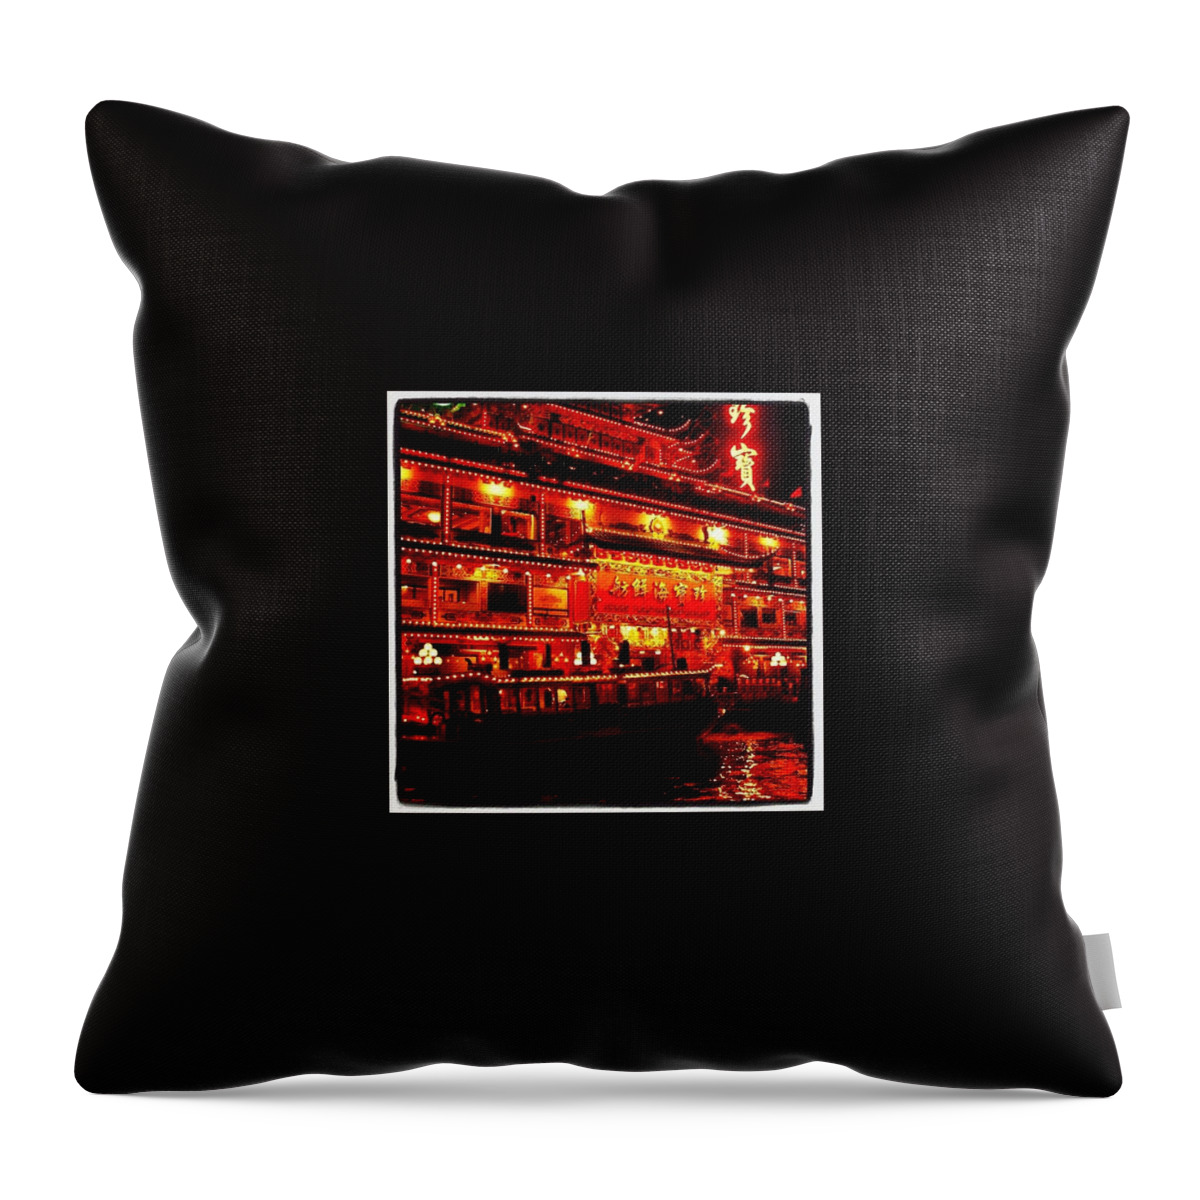 Hkellex13 Throw Pillow featuring the photograph Jumbo by Lorelle Phoenix